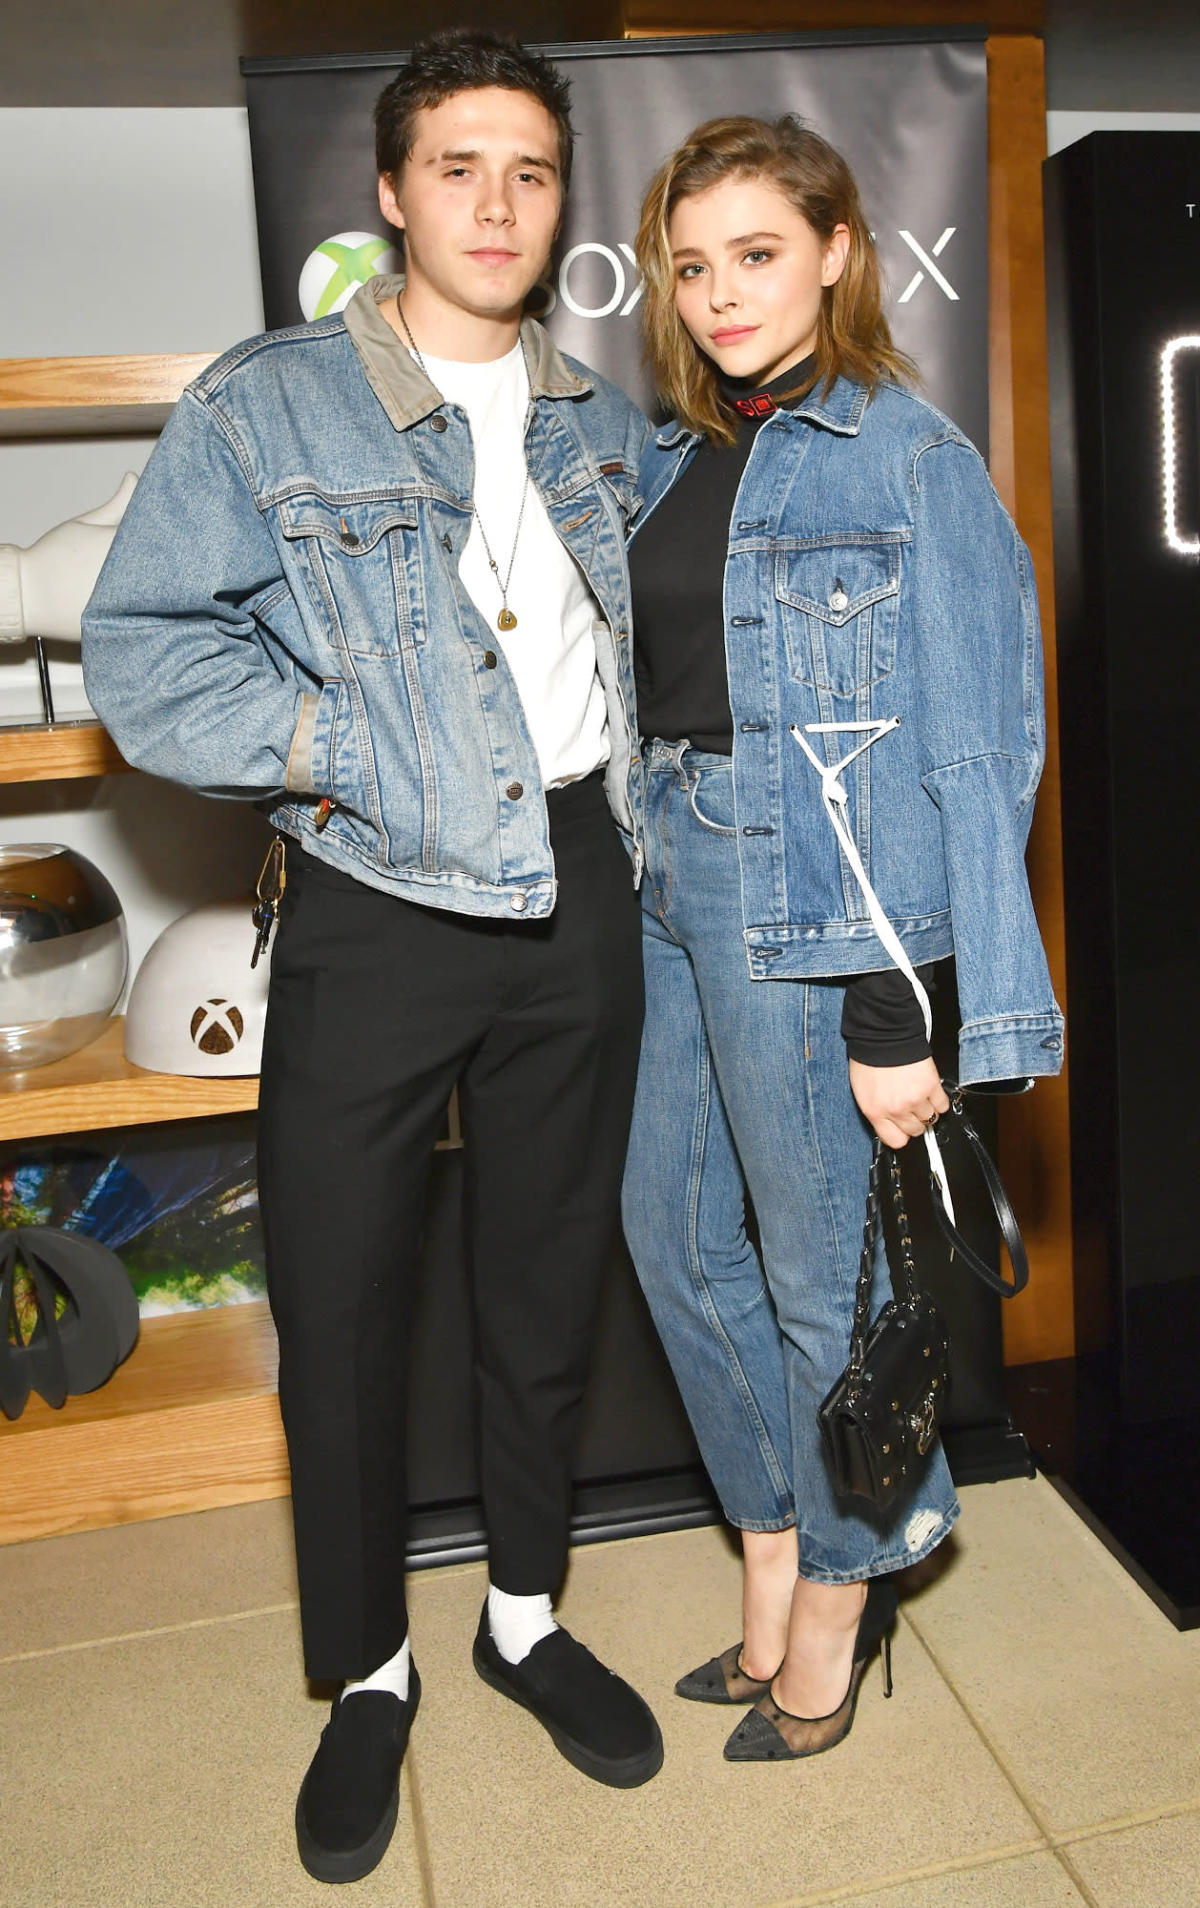 Brooklyn Beckham And Chloë Grace Moretz Make Their Public Debut As A Couple In Matching Outfits